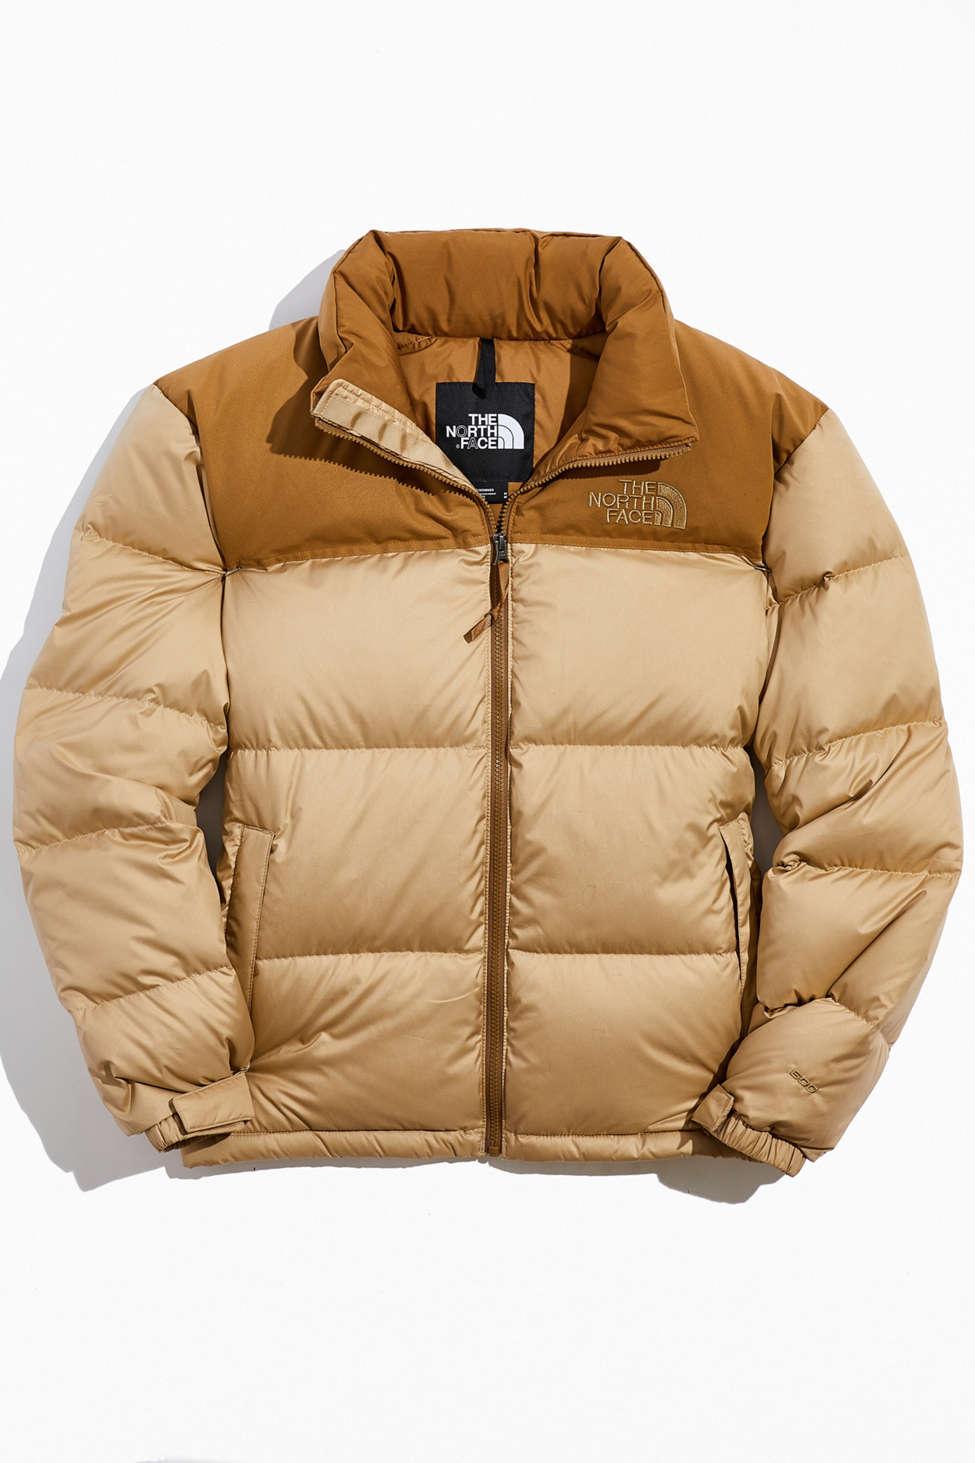 The North Face Eco Nuptse Recycled Puffer Jacket in Natural for Men